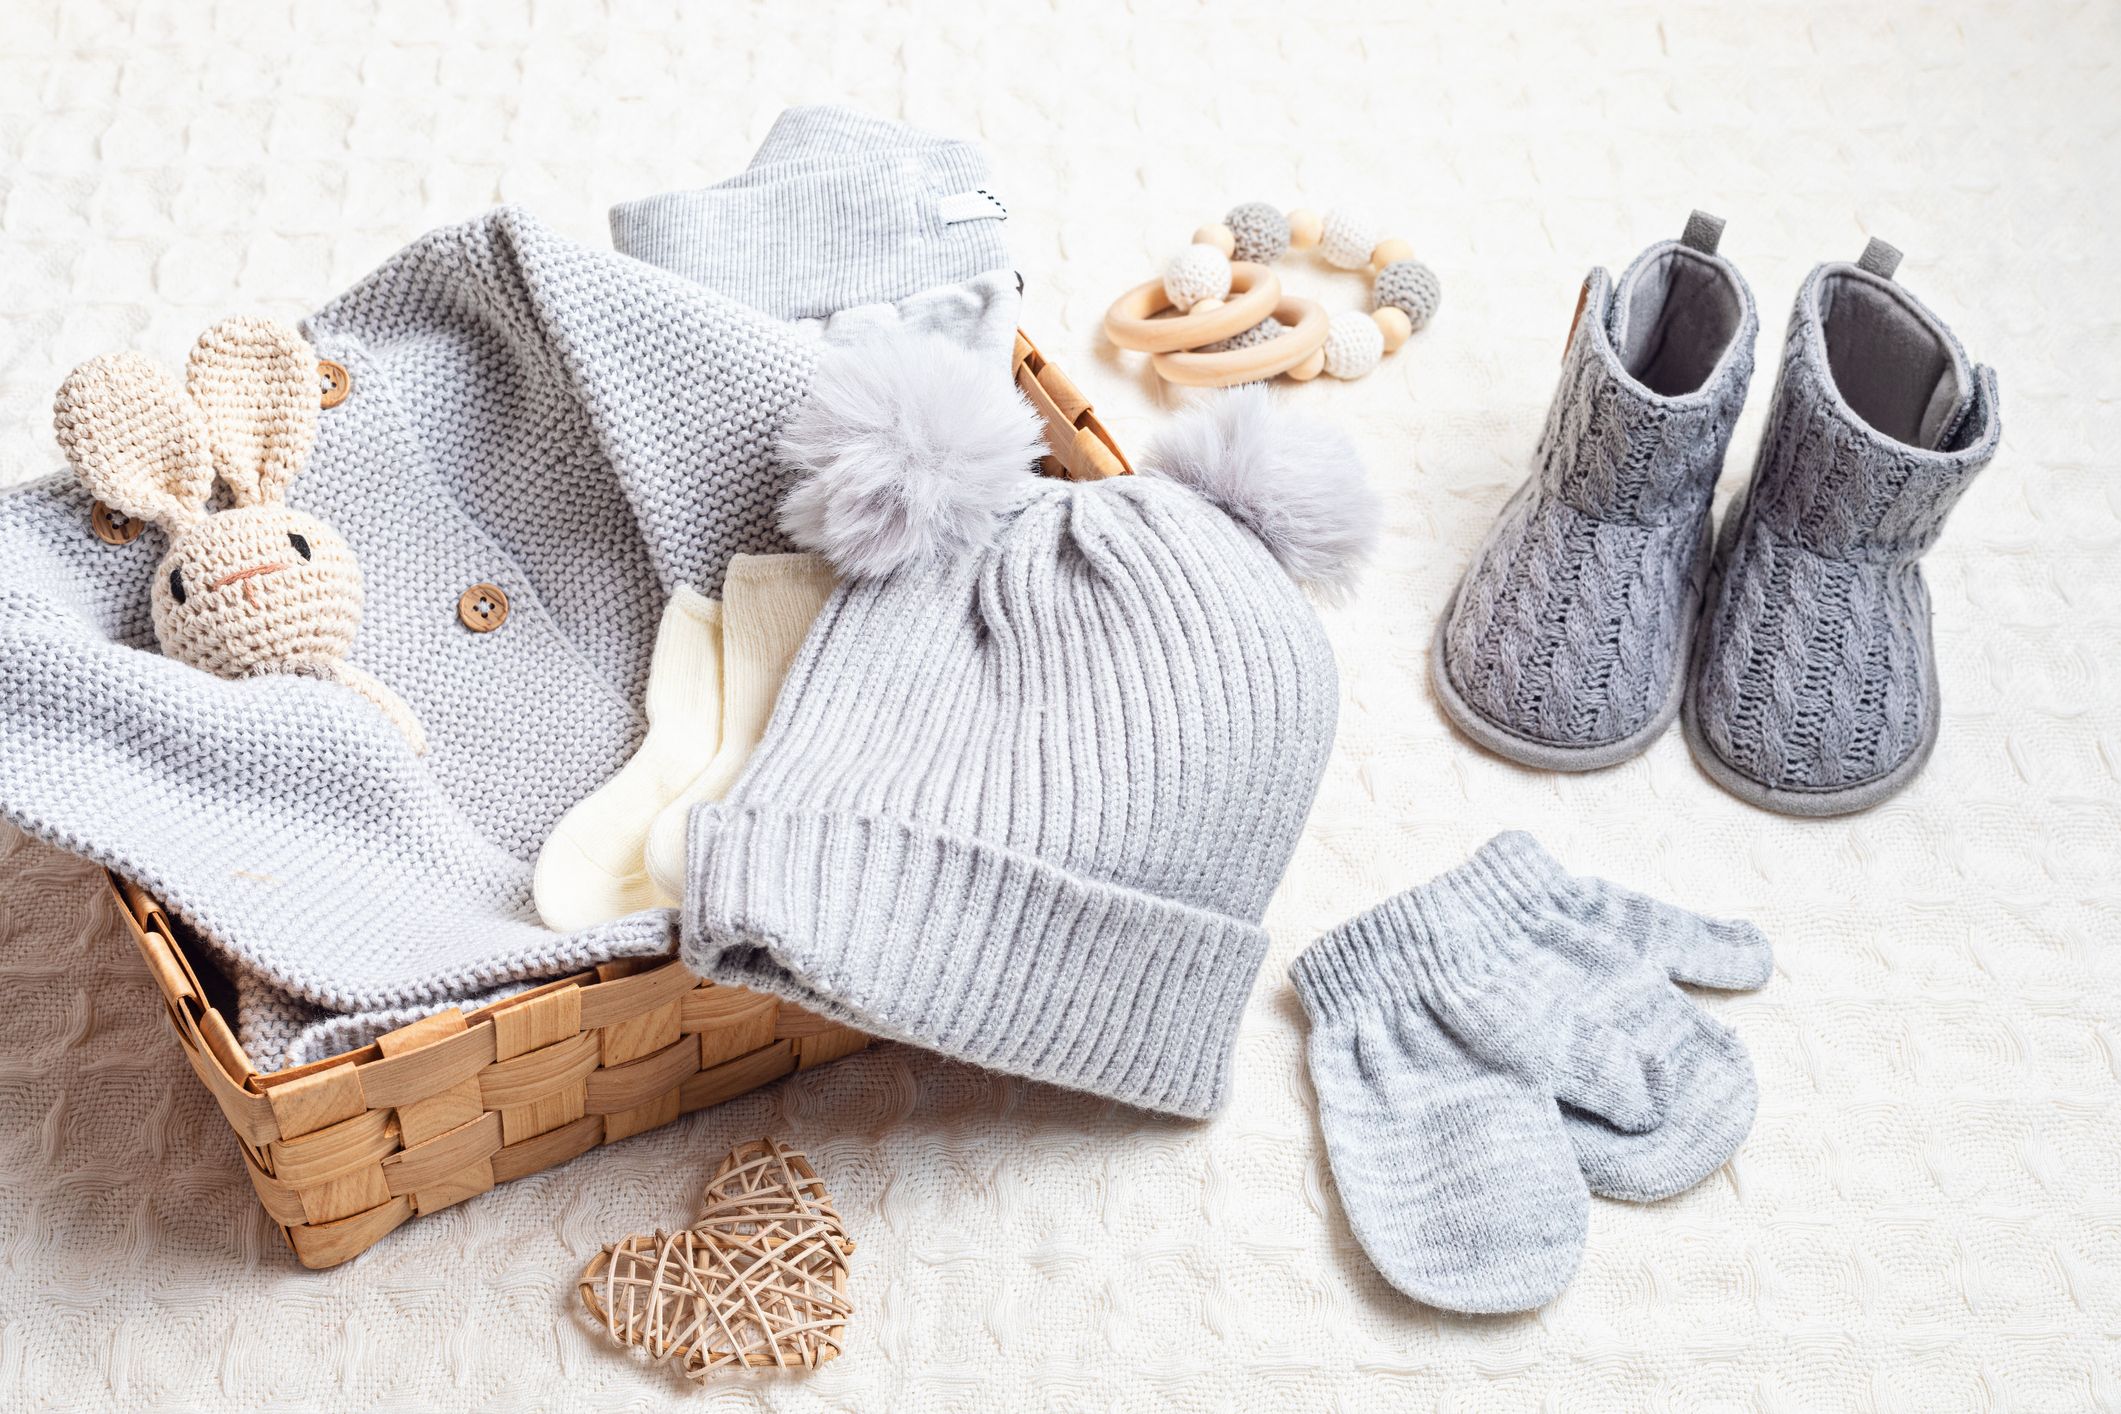 The best baby knitting yarn for your next knitting or crochet project